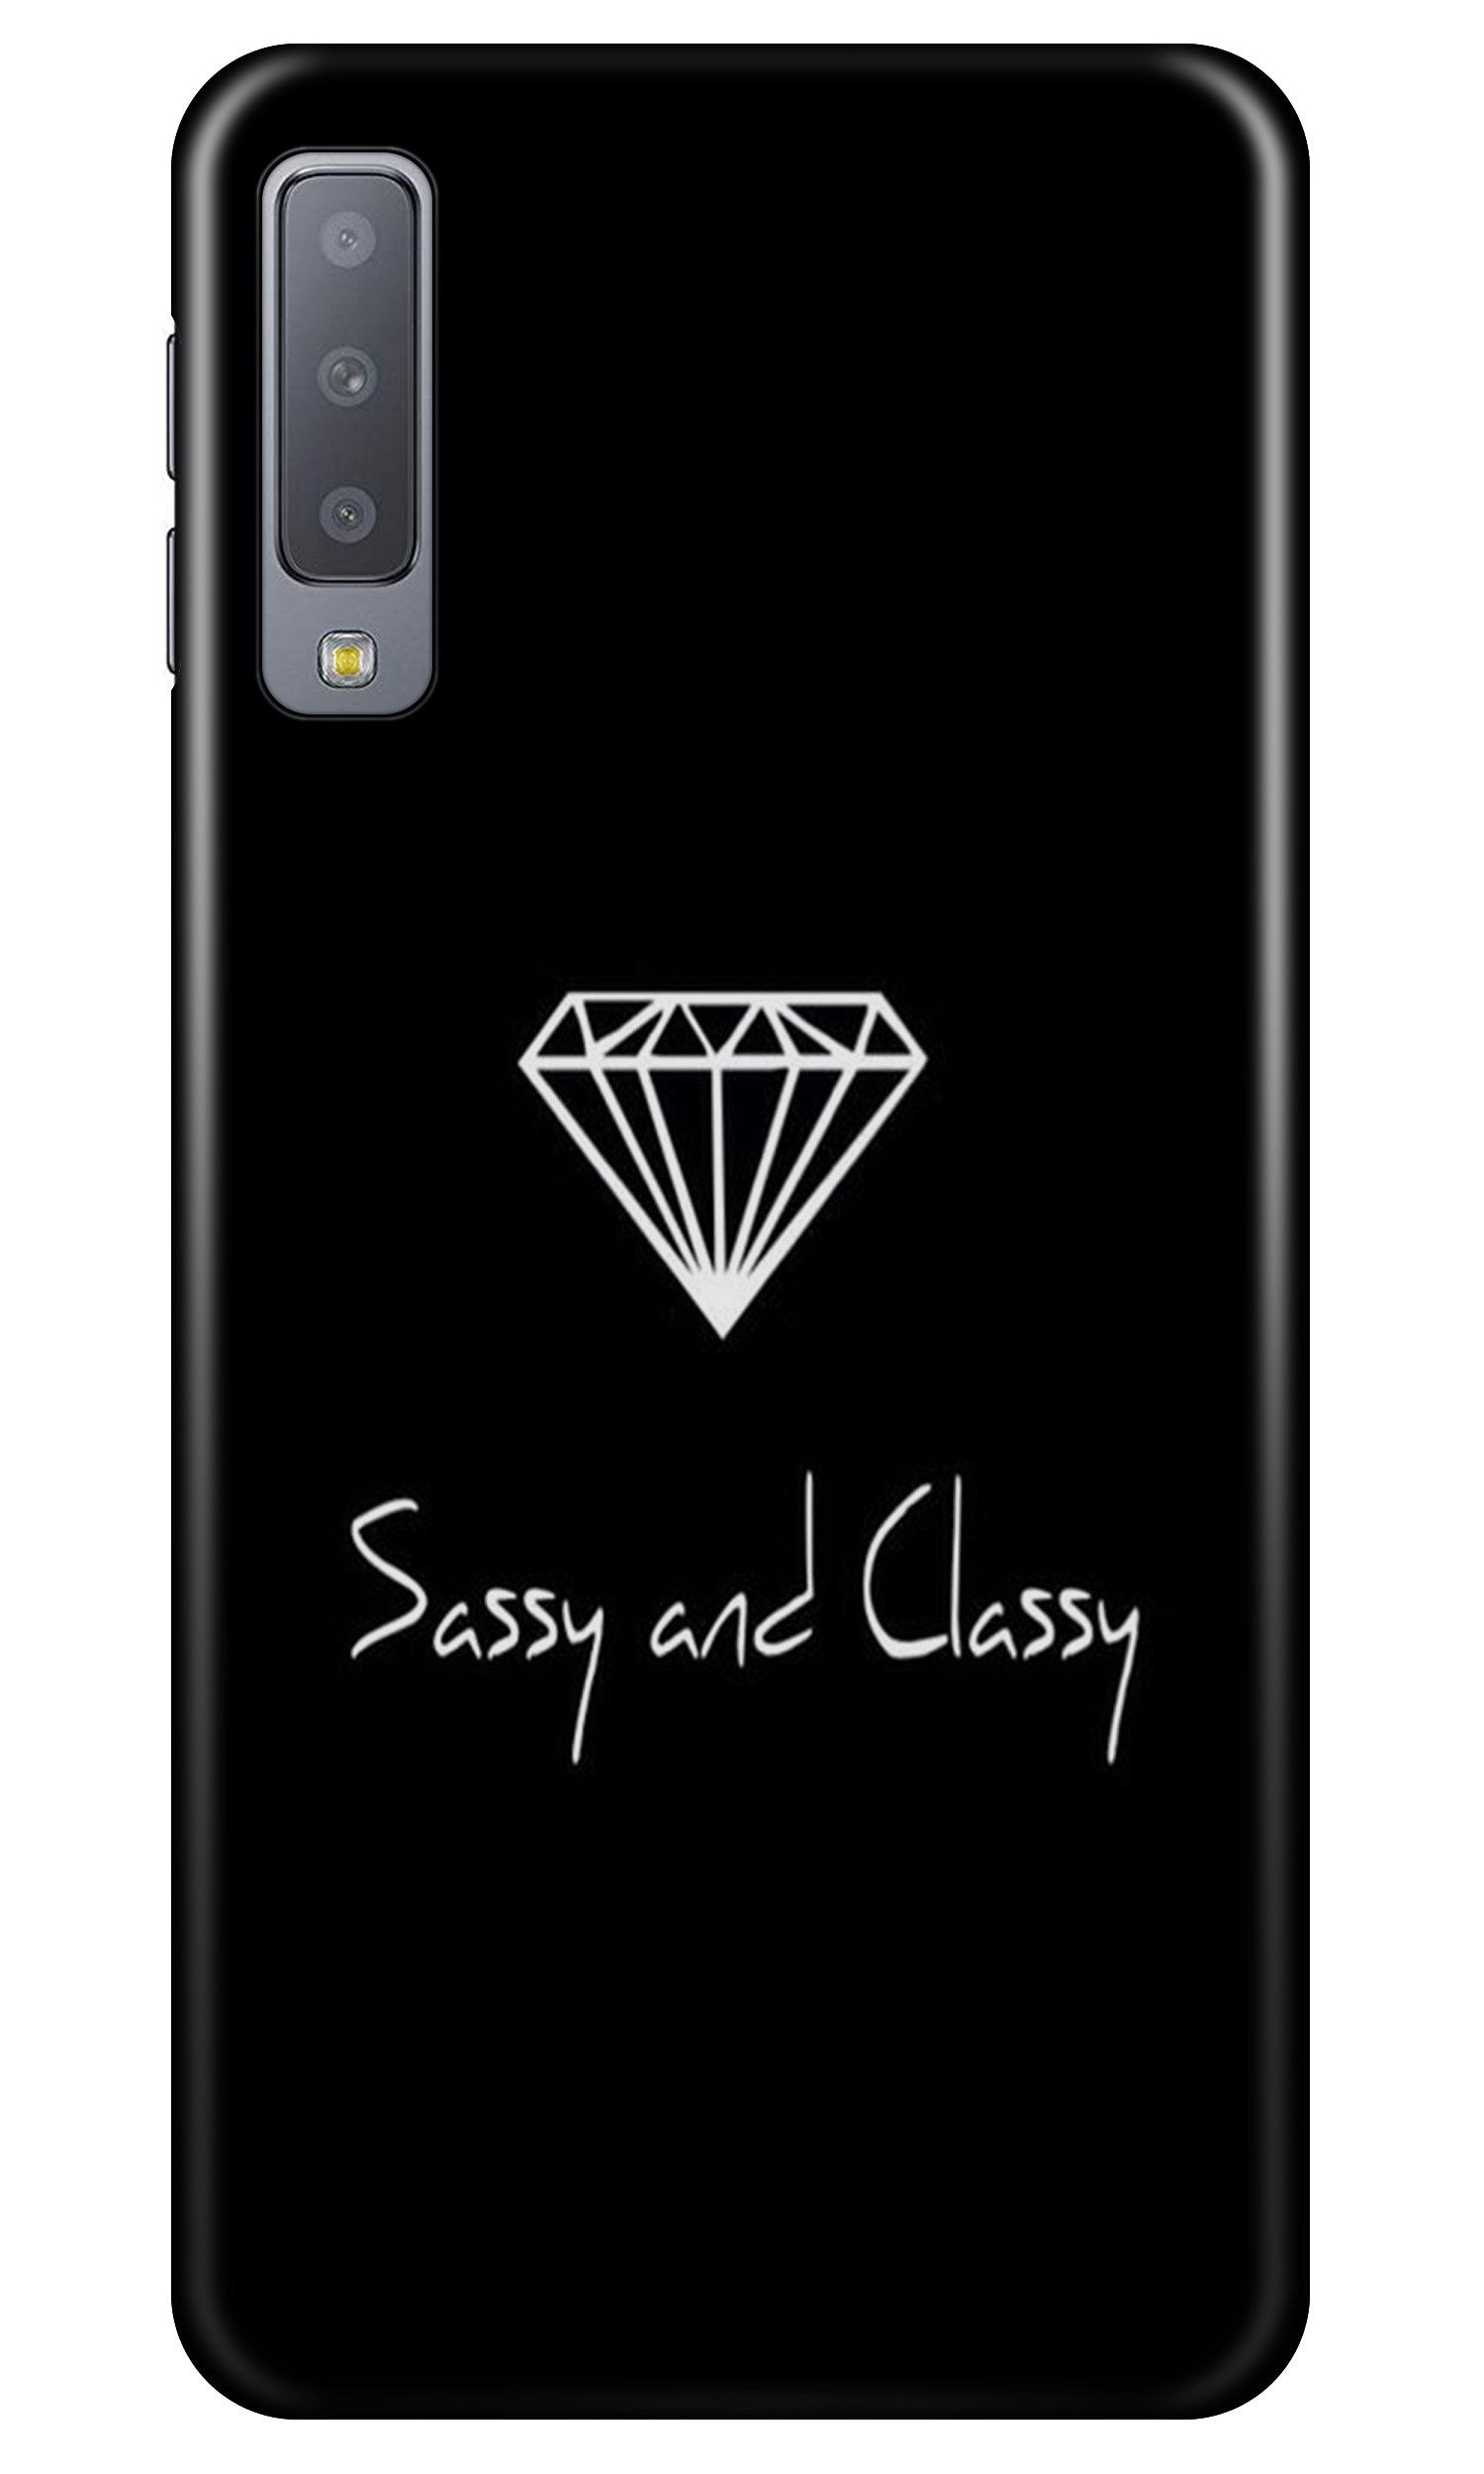 Sassy and Classy Case for Samsung Galaxy A70 (Design No. 264)